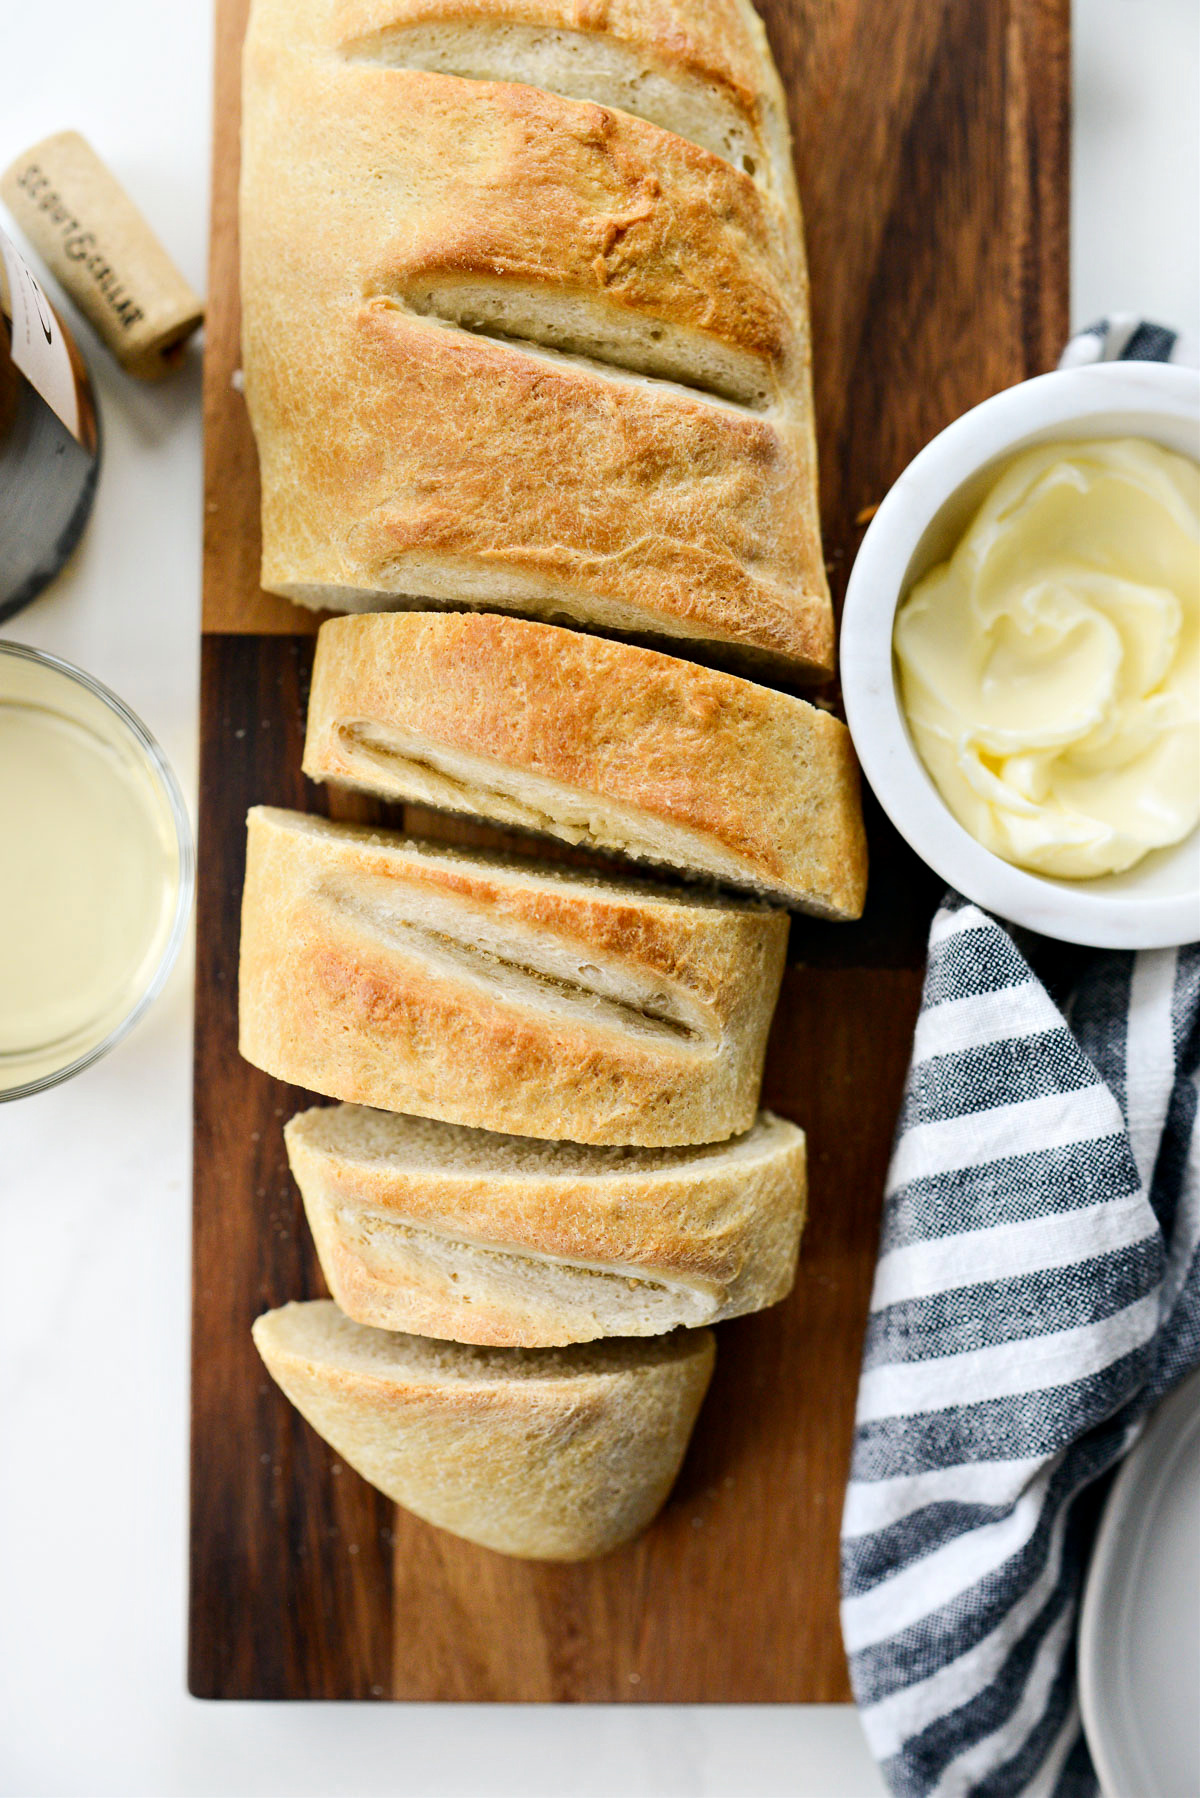 https://www.simplyscratch.com/wp-content/uploads/2021/01/Easy-Homemade-French-Bread-l-SimplyScratch.com-homemade-easy-frenchbread-recipes-quick-recipe-bread-breadbaking-baking-22.jpg